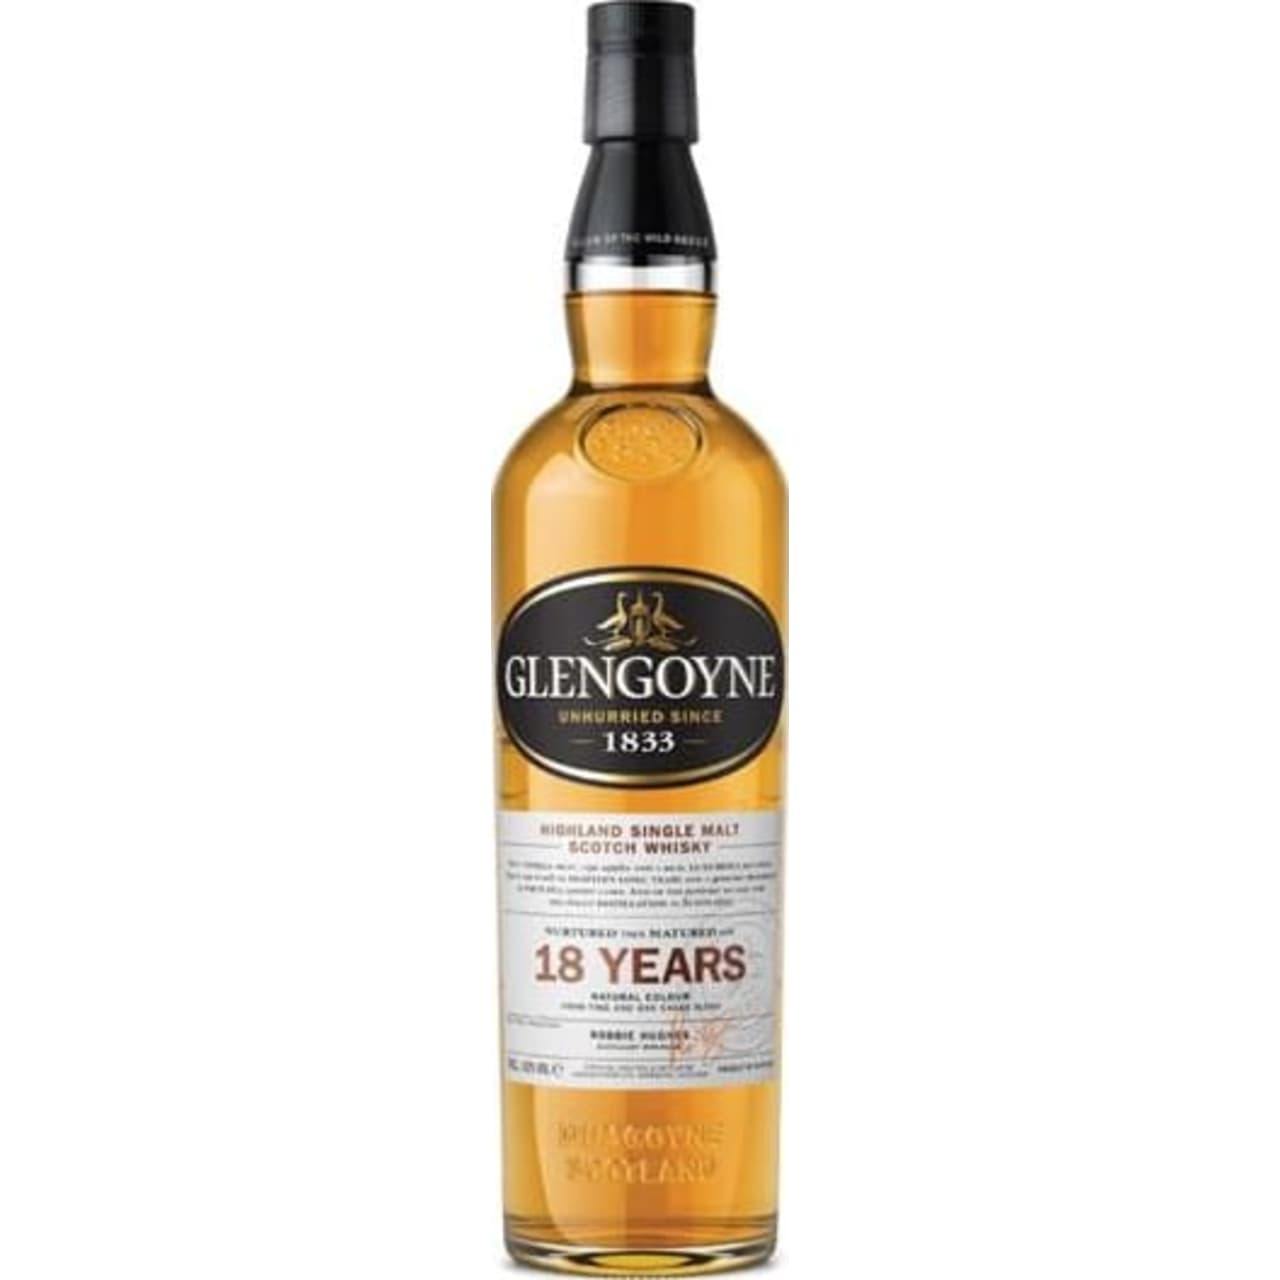 Glengoyne 18 Year Old is a rich and luxurious Highland single malt that has been matured in a mix of refill sherry casks and a generous portion of first-fill sherry casks.